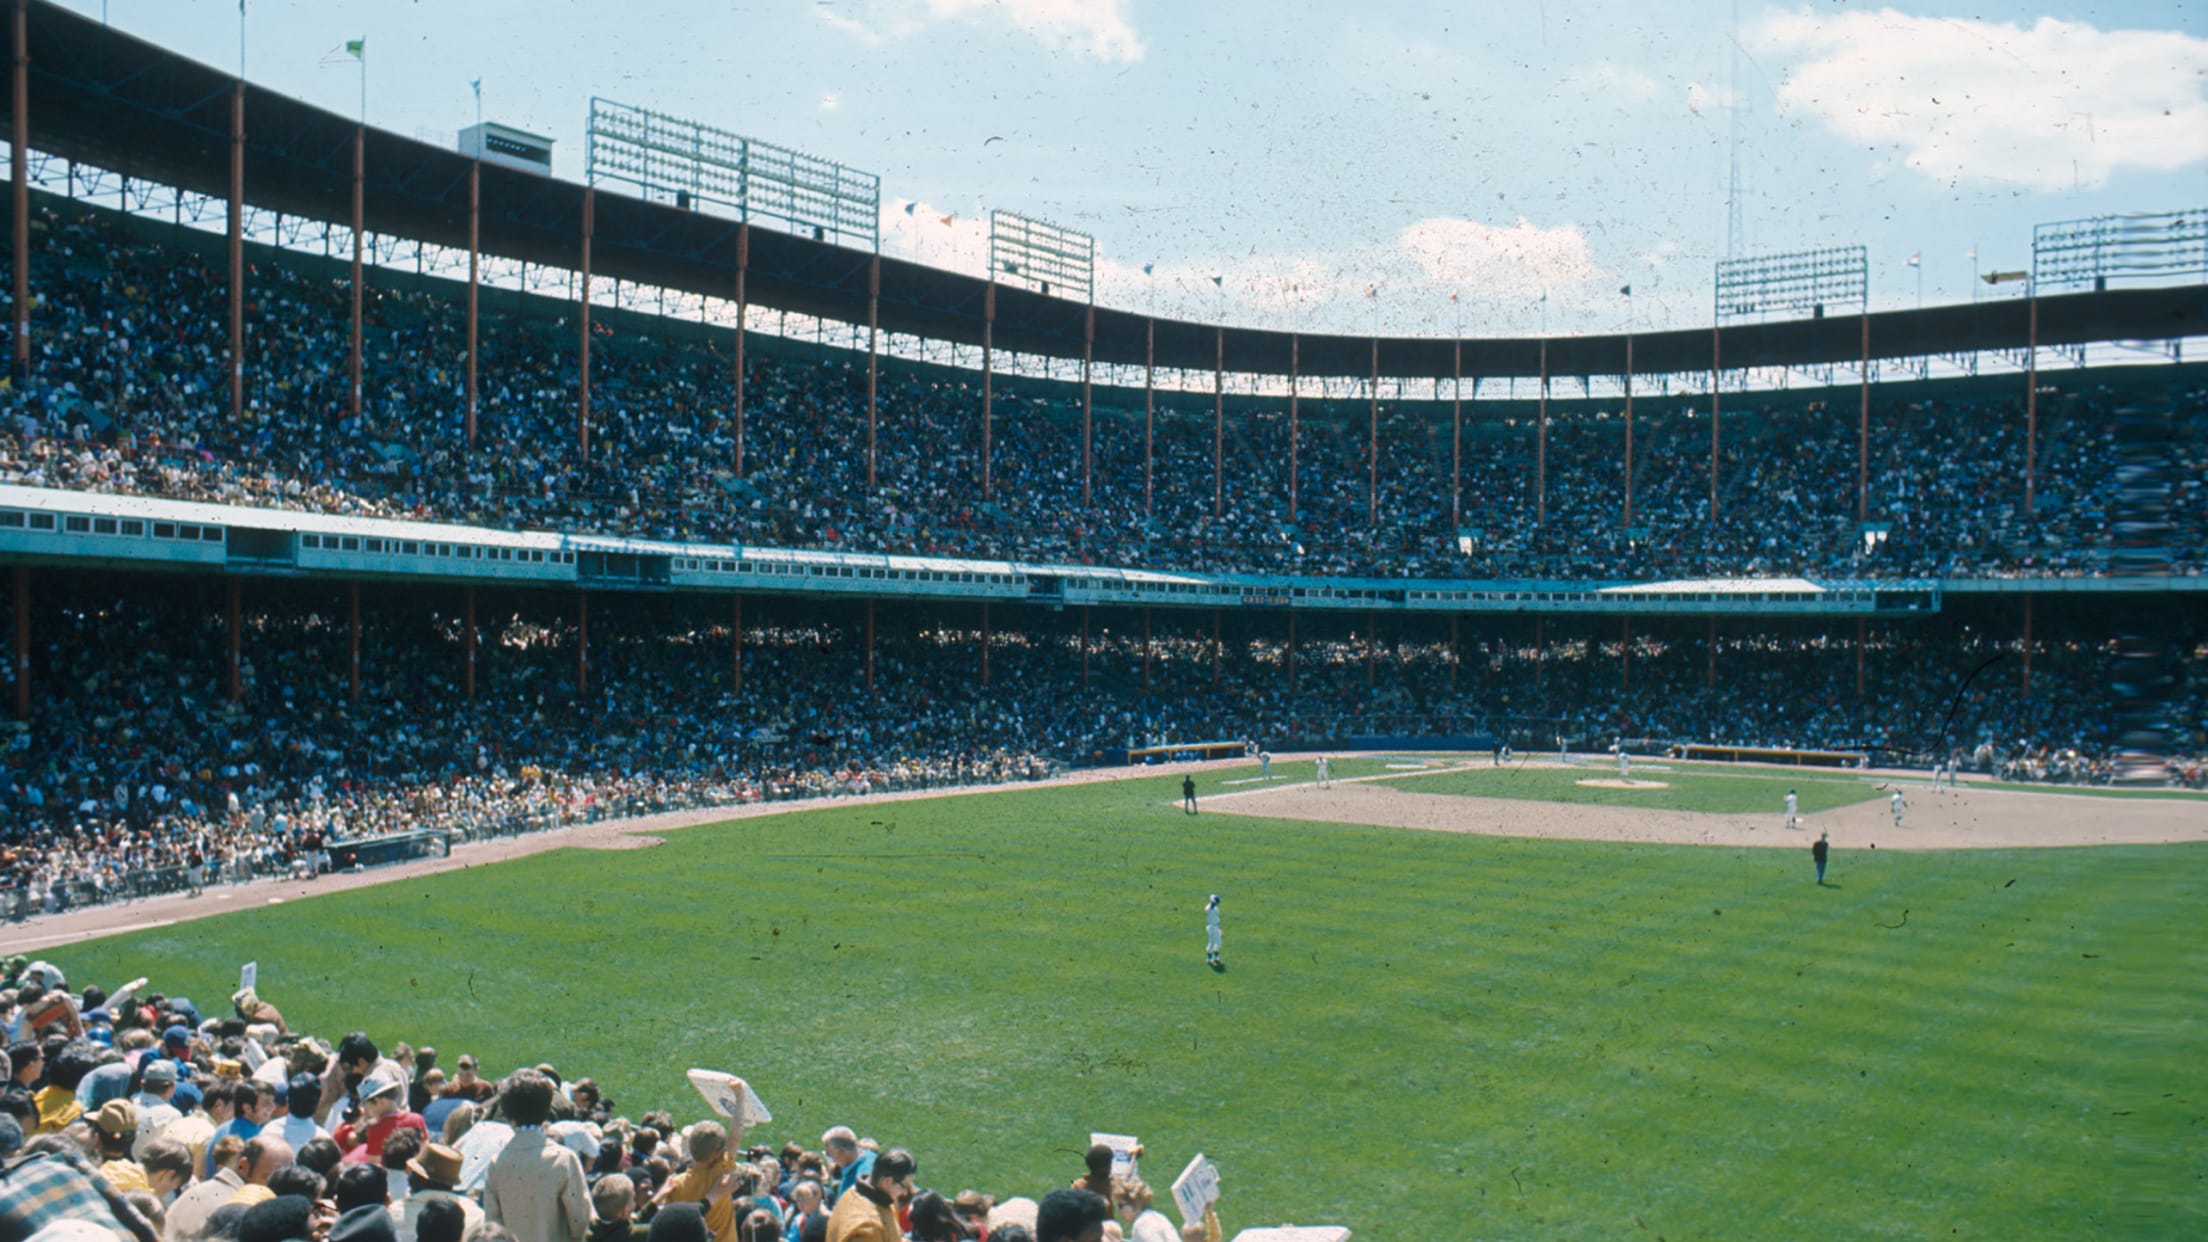 Old Stadiums, Part III - Royals Review